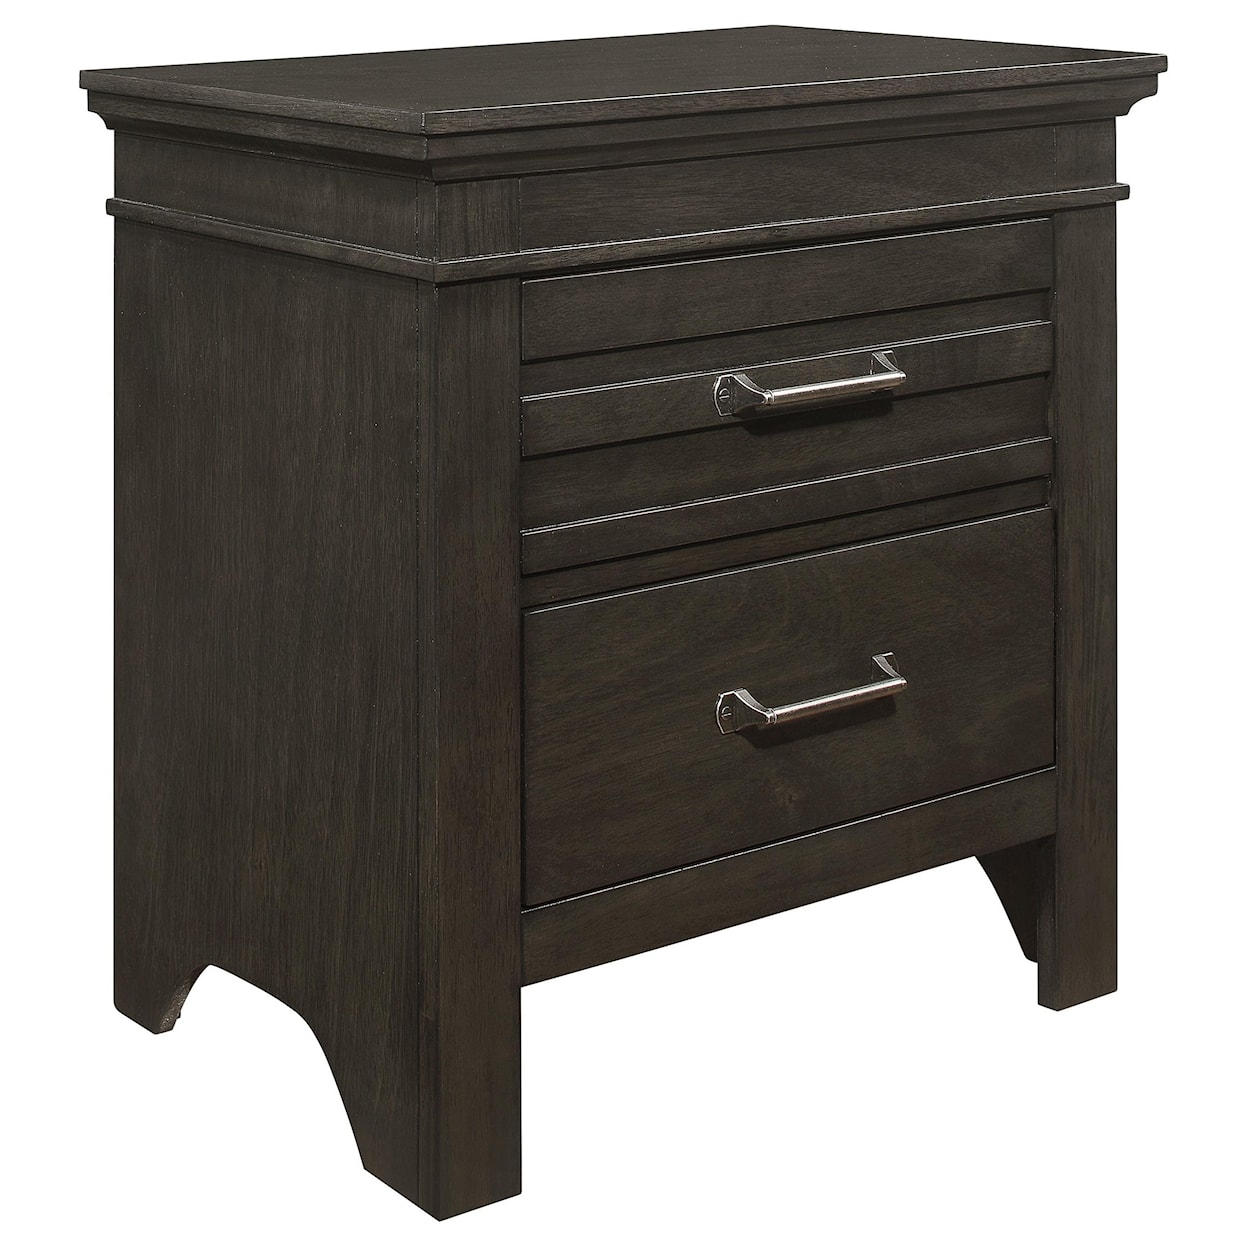 Homelegance Furniture Blaire Farm Night Stand